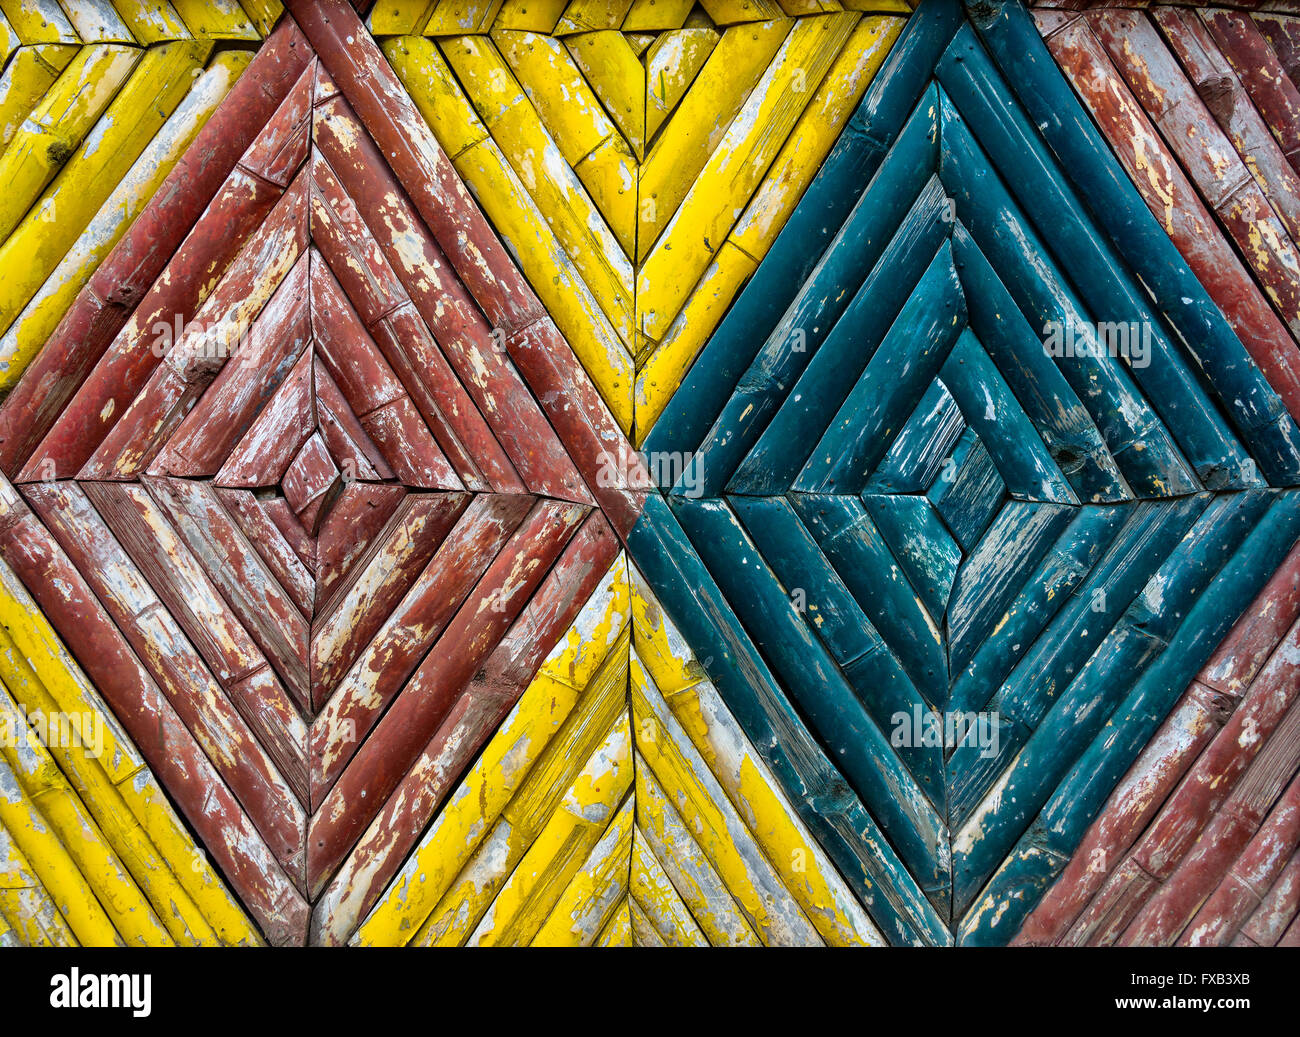 A colorful bamboo fence texture Stock Photo